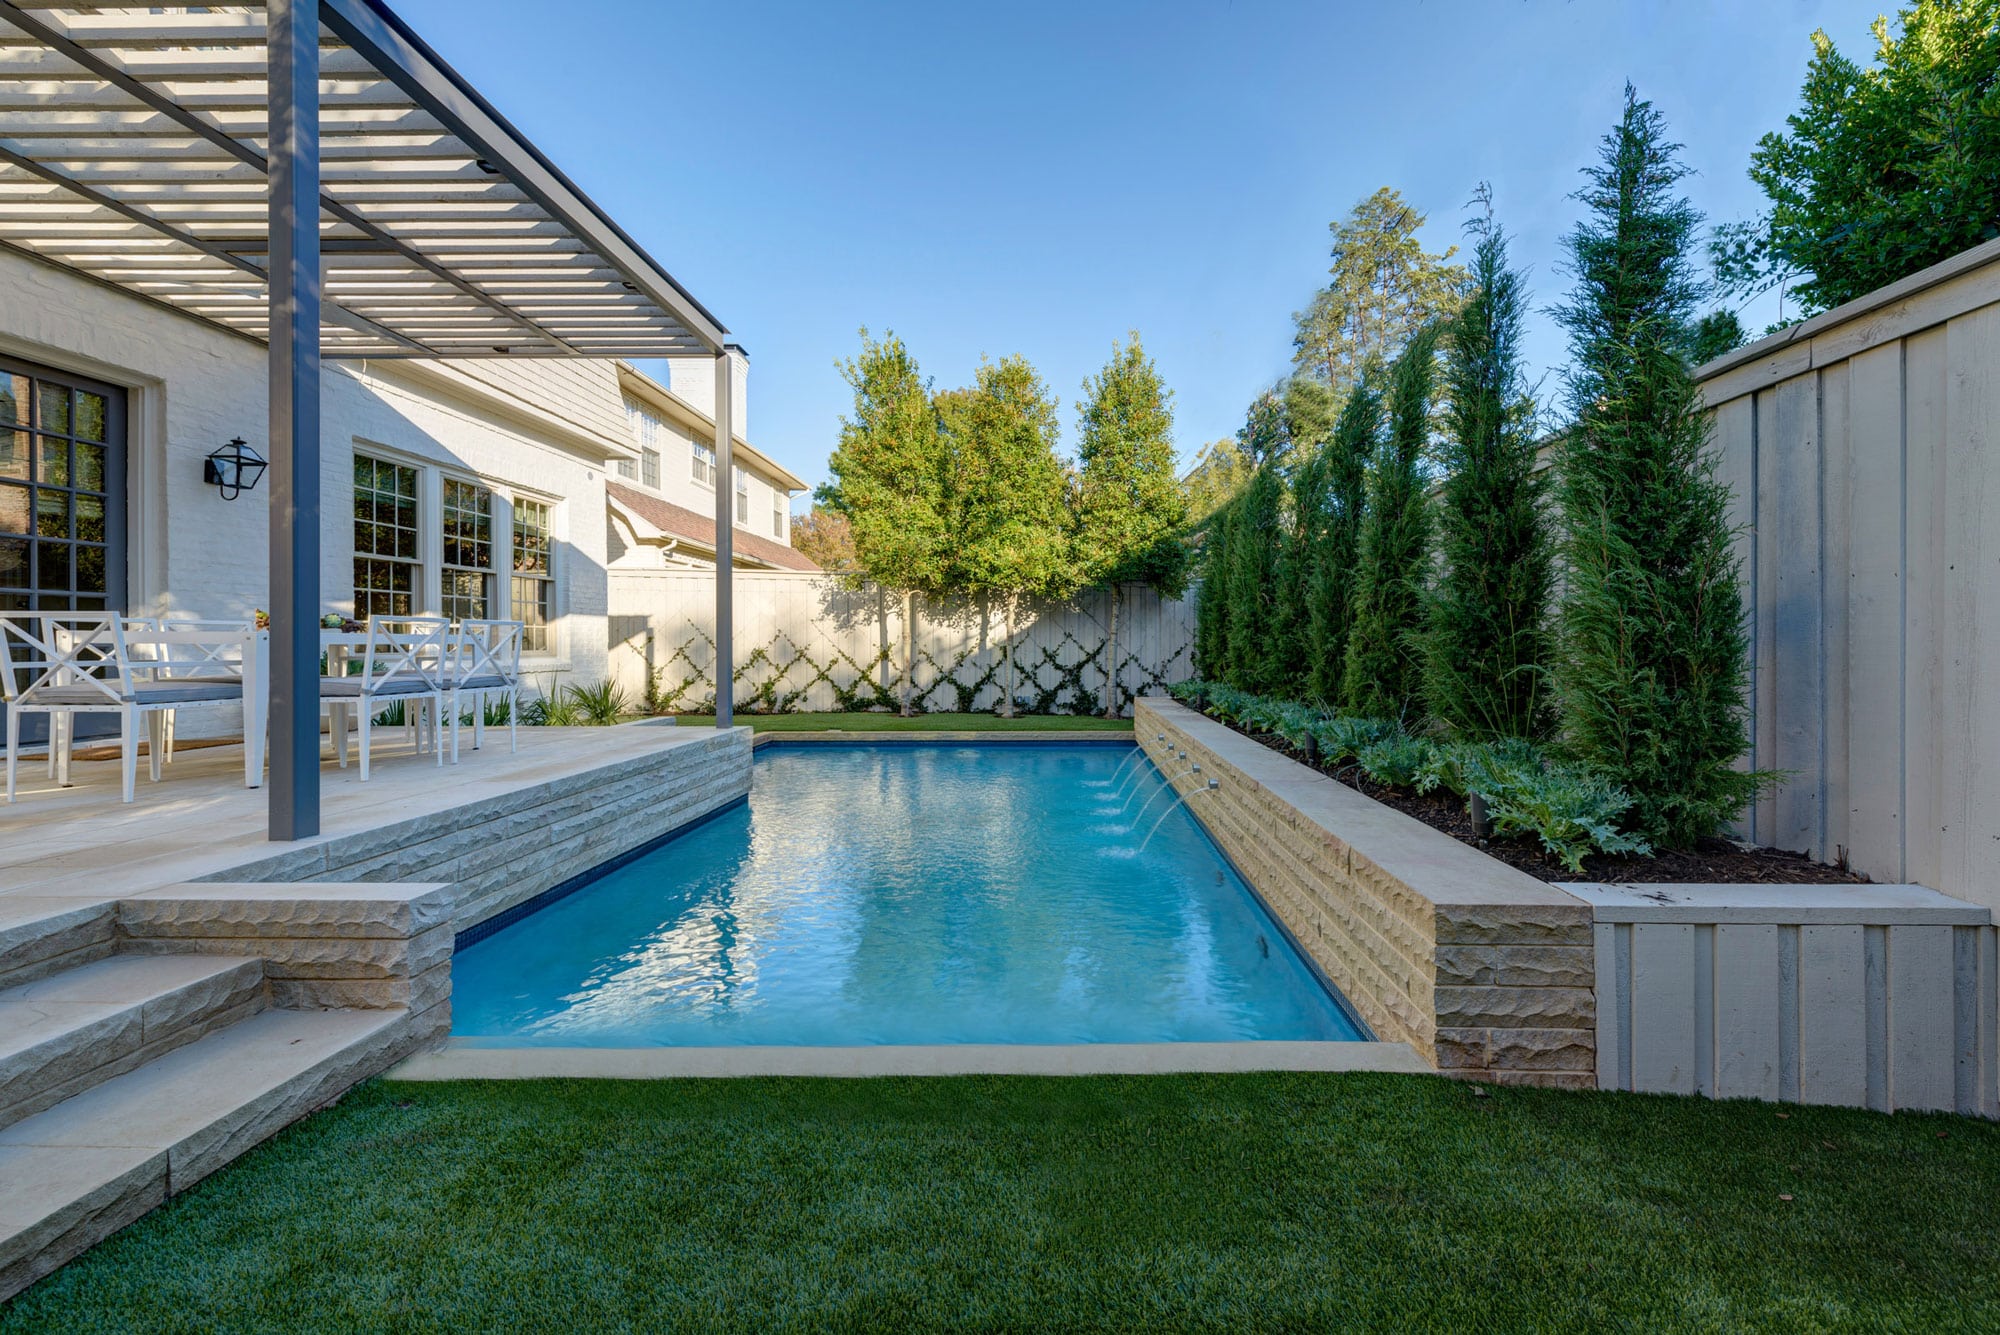 a backyard with a swimming pool and landscaping | Southern Botanical